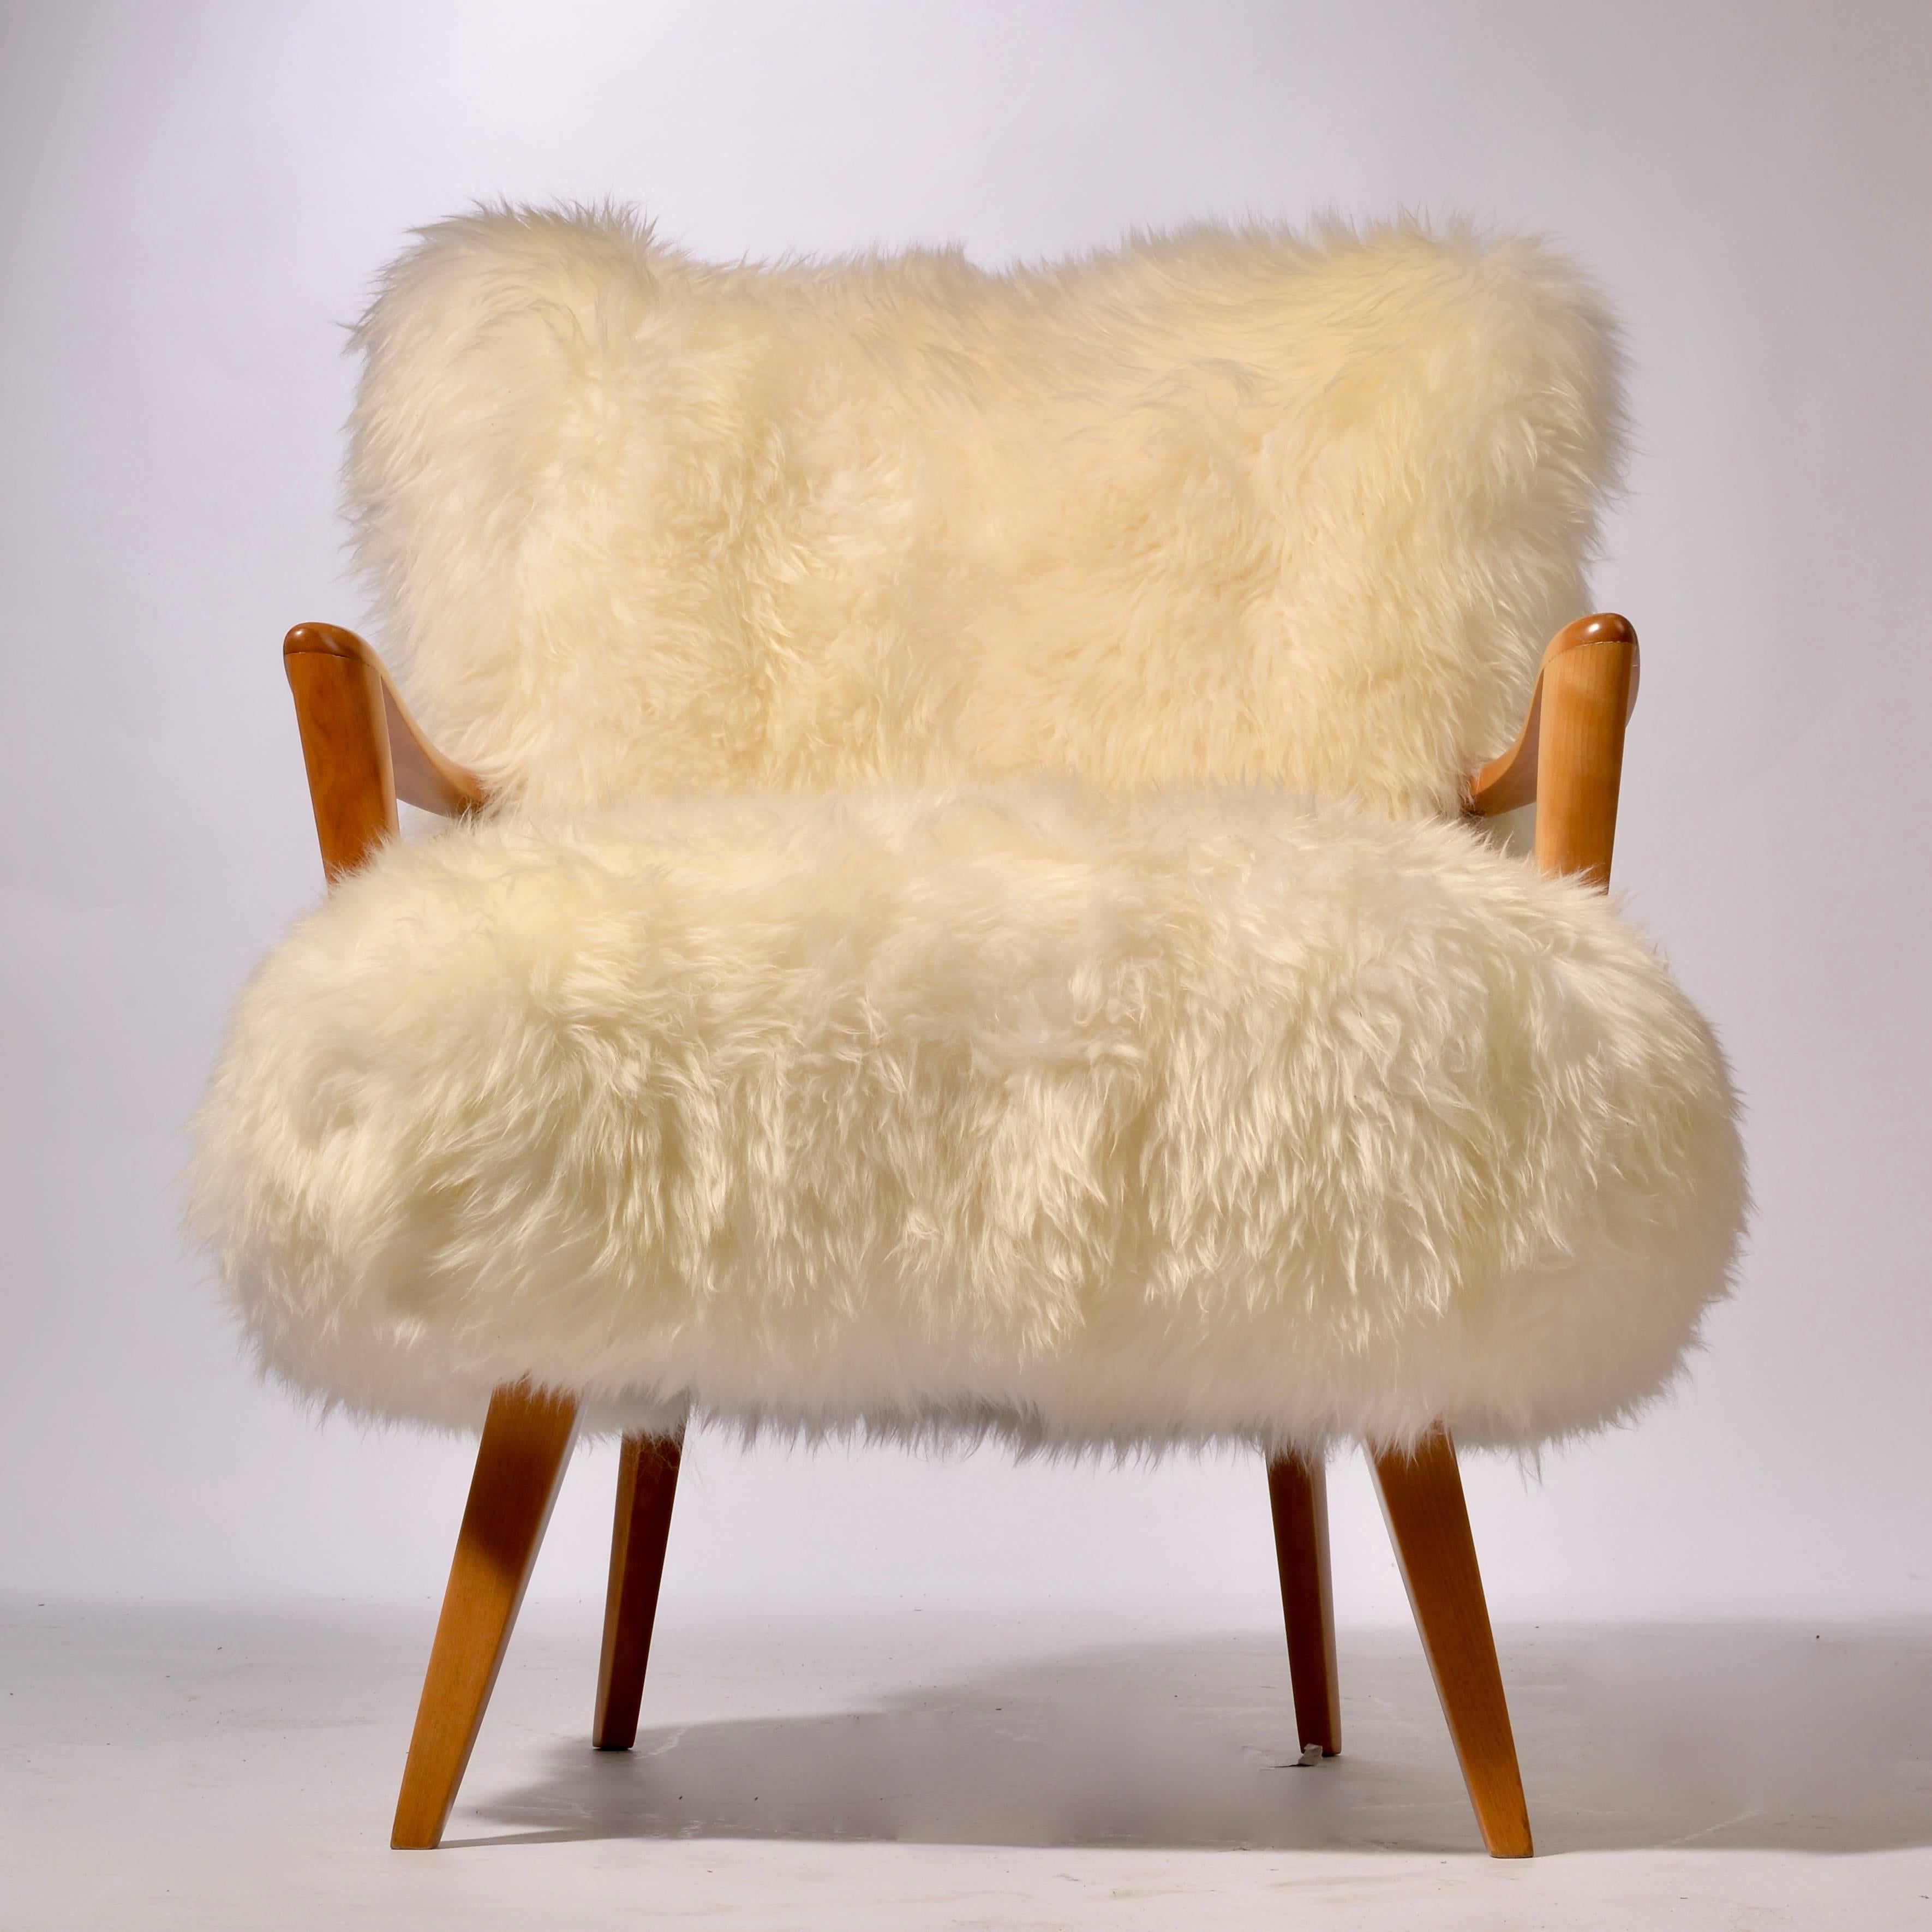 This is a rare Heywood Wakefield lounge chair upholstered in sheepskin and refinished.